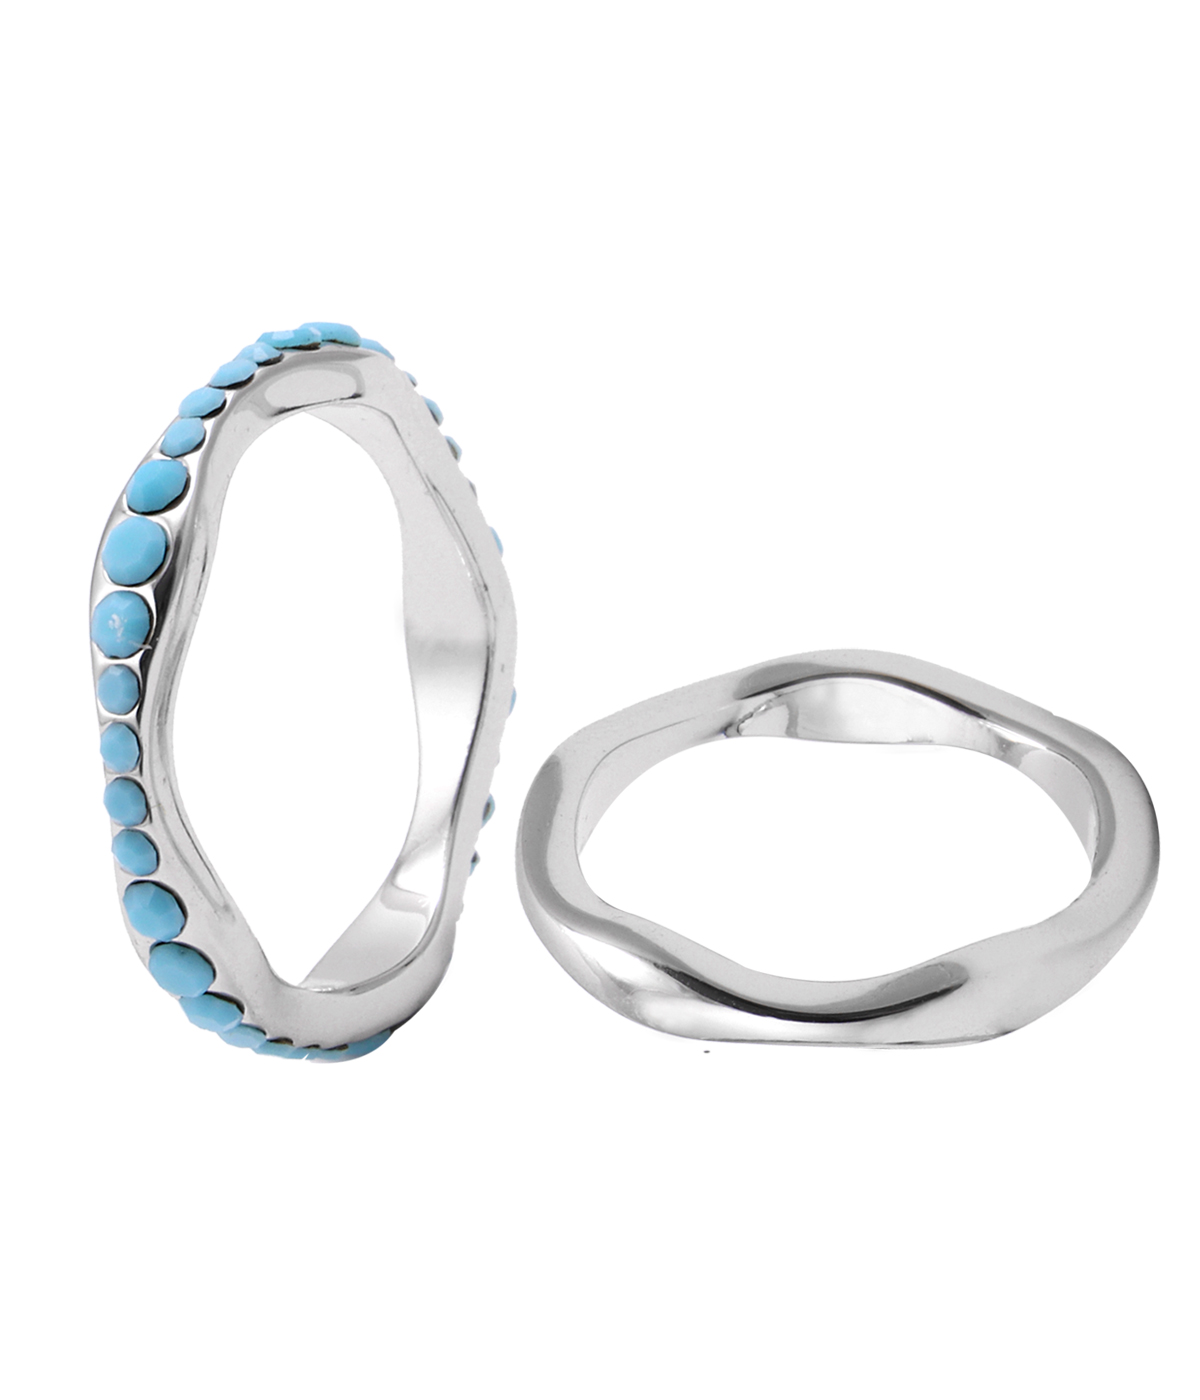 FLOW ring - Turquoise -latest RING,Band Ring design 2021